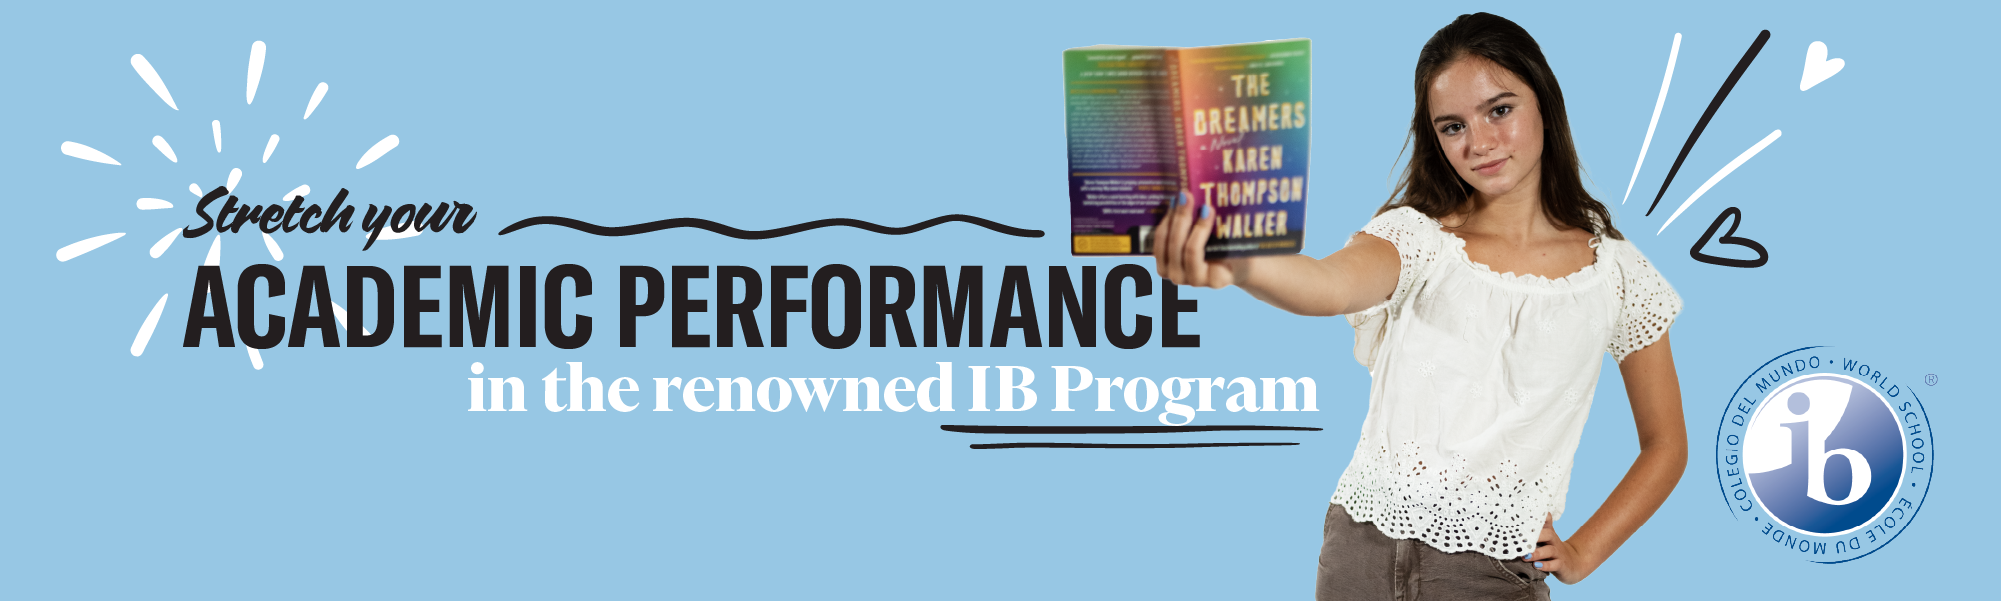 Stretch your academic performance in the renowned IB program